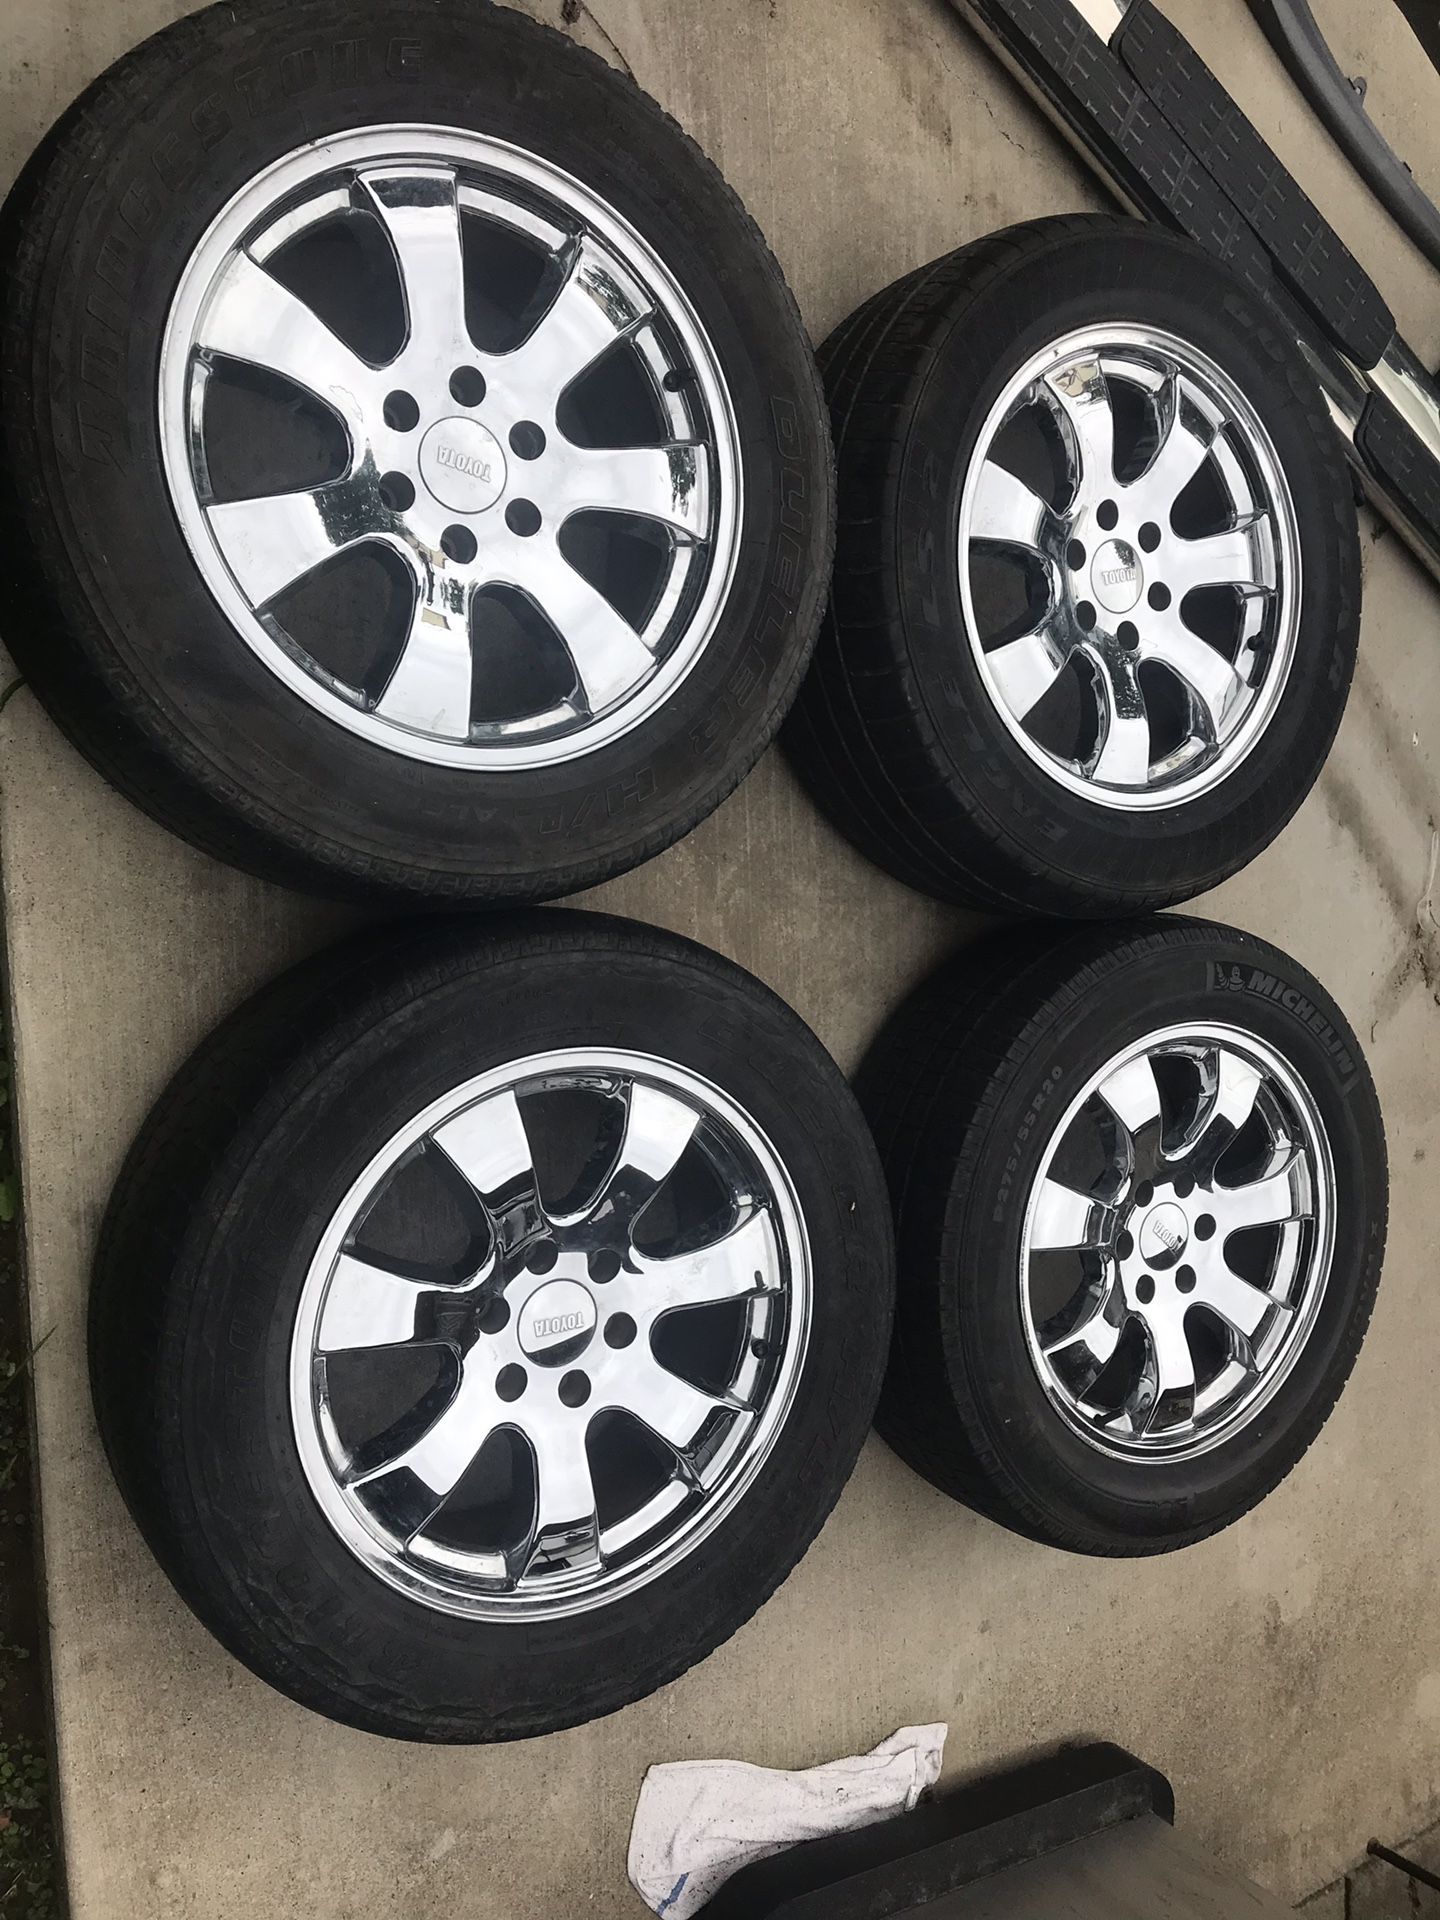 20” Chrome Toyota Rims and Tires